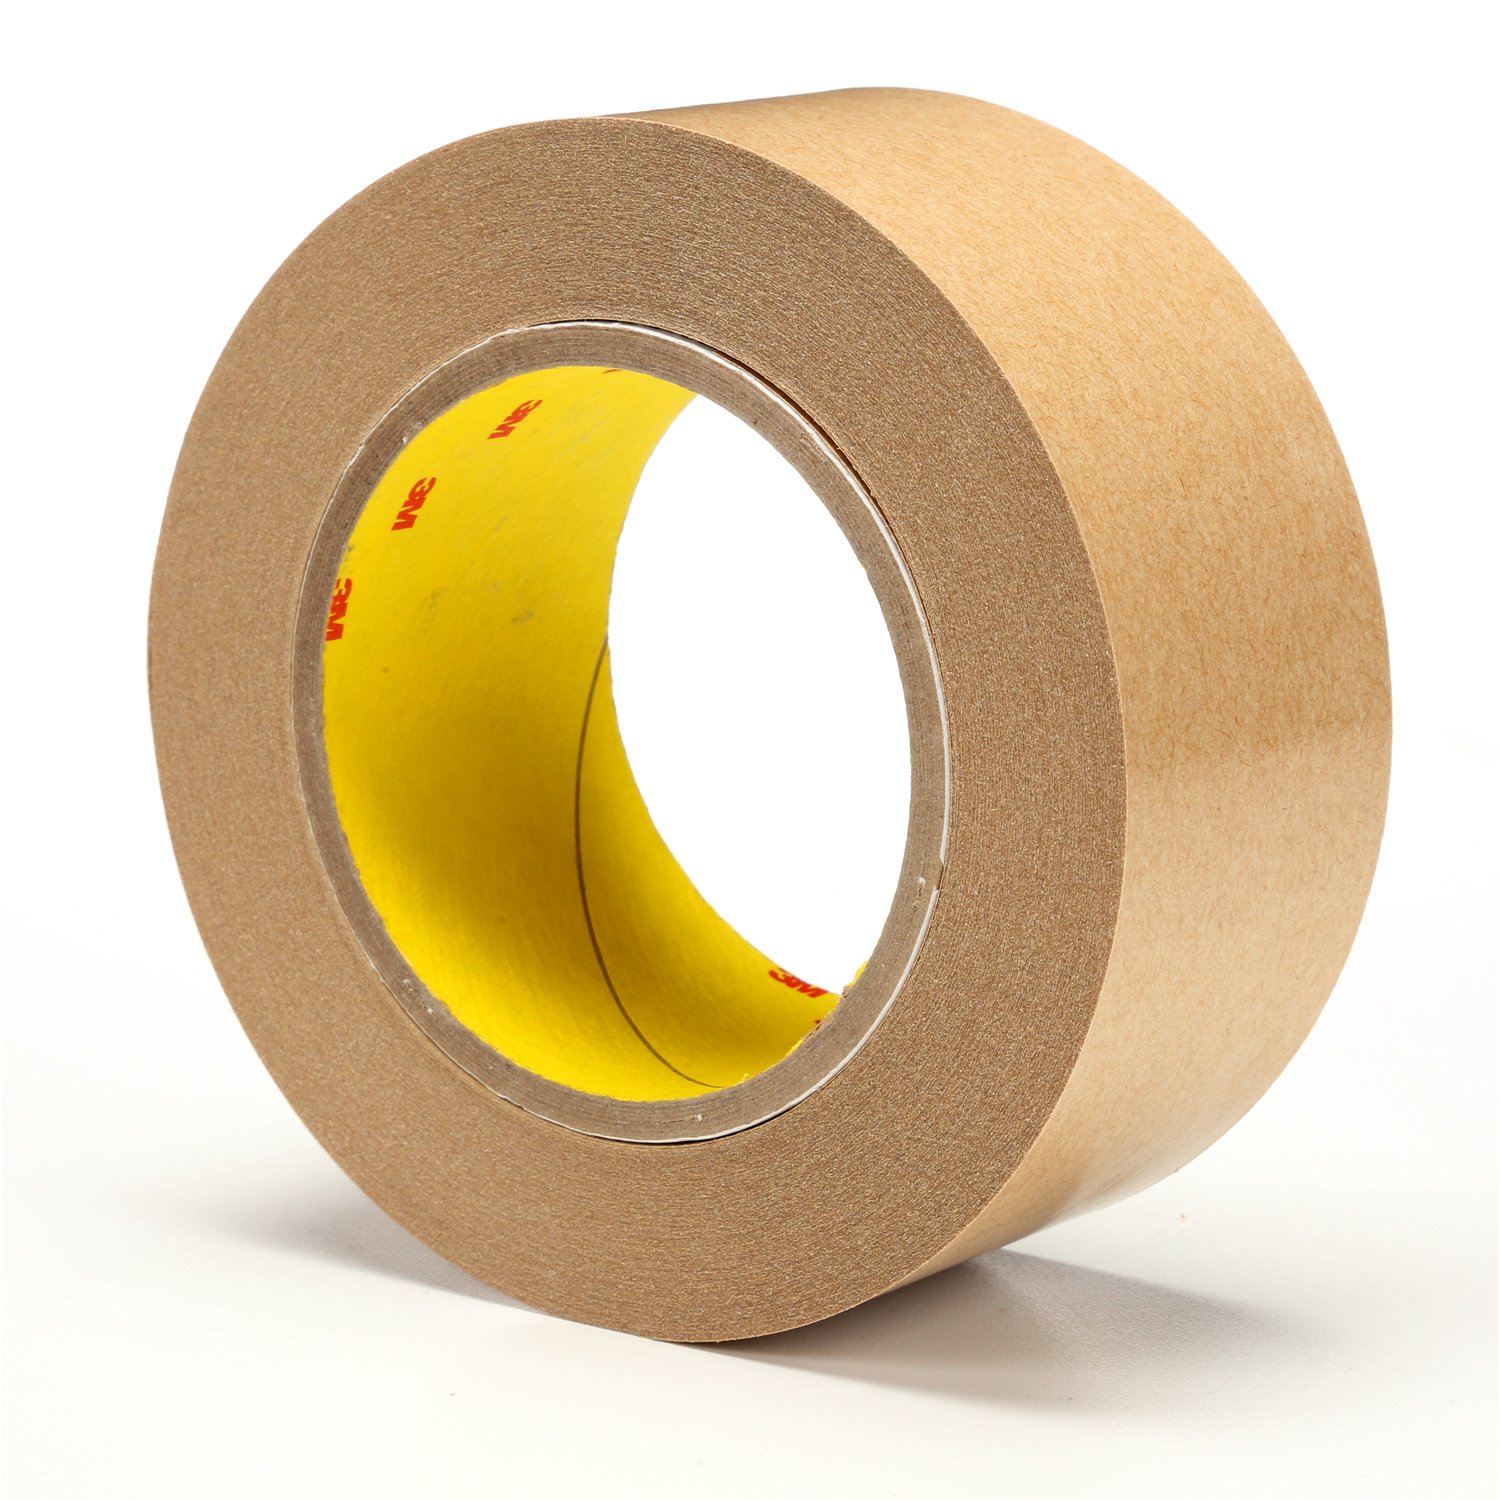 7000048400 - 3M Adhesive Transfer Tape 465 Clear, 2 in x 60 yd, 2 mil, 24 rolls per
case